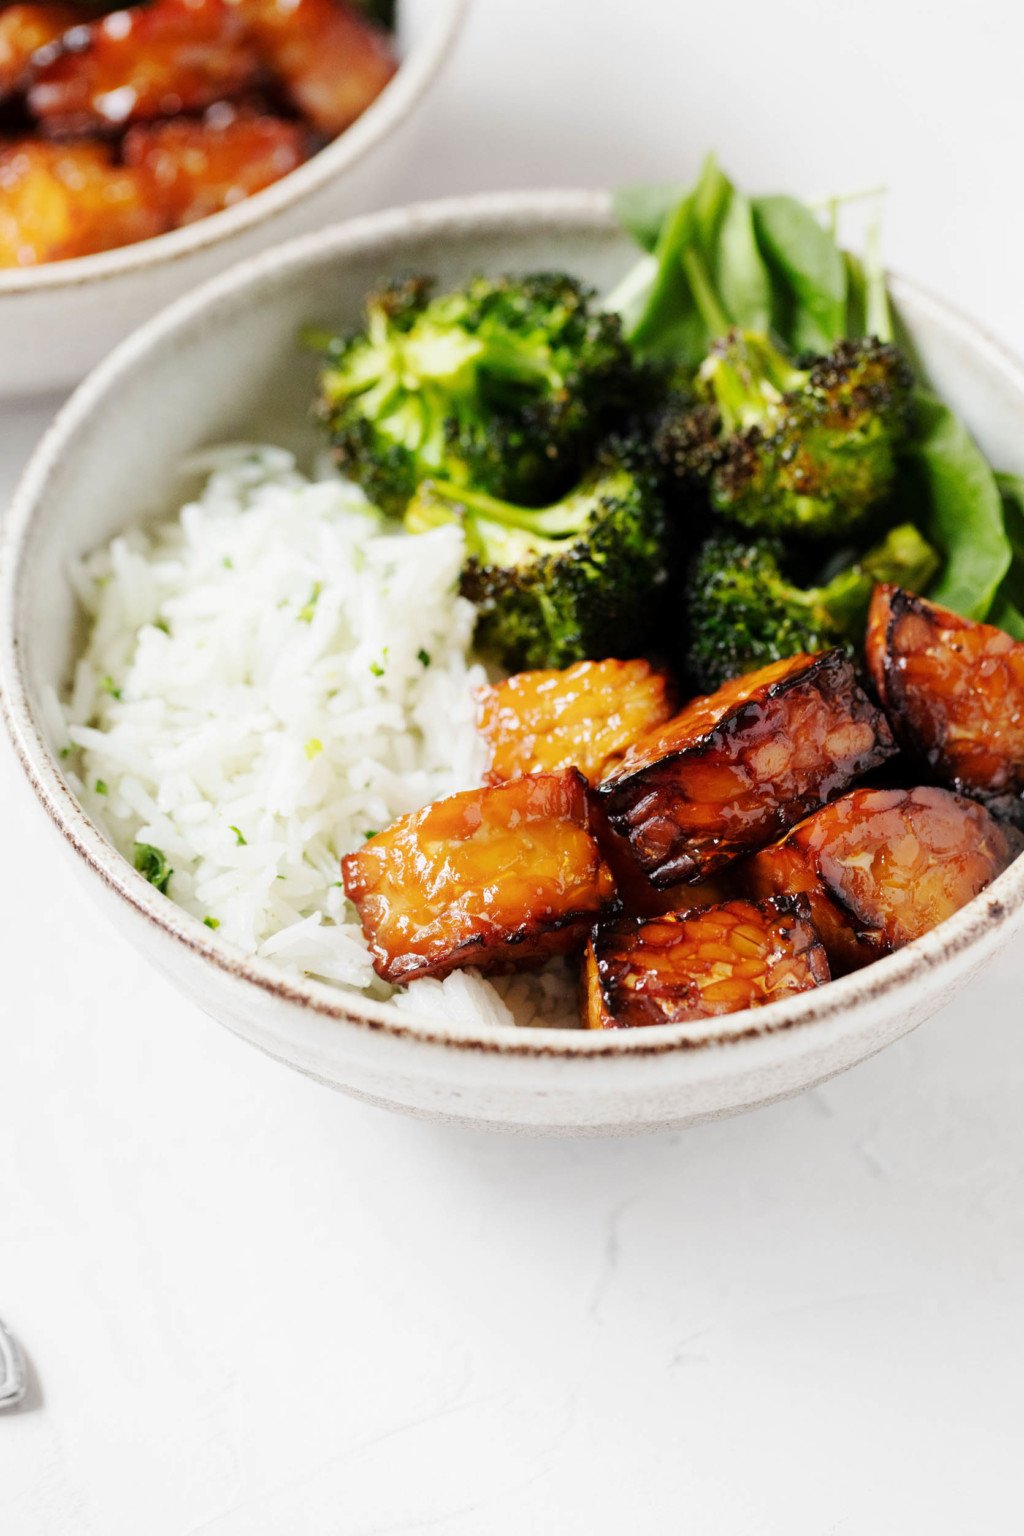 A ceramic bowl has been piled high with plant based ingredients, including cooked rice, a protein, and greens.